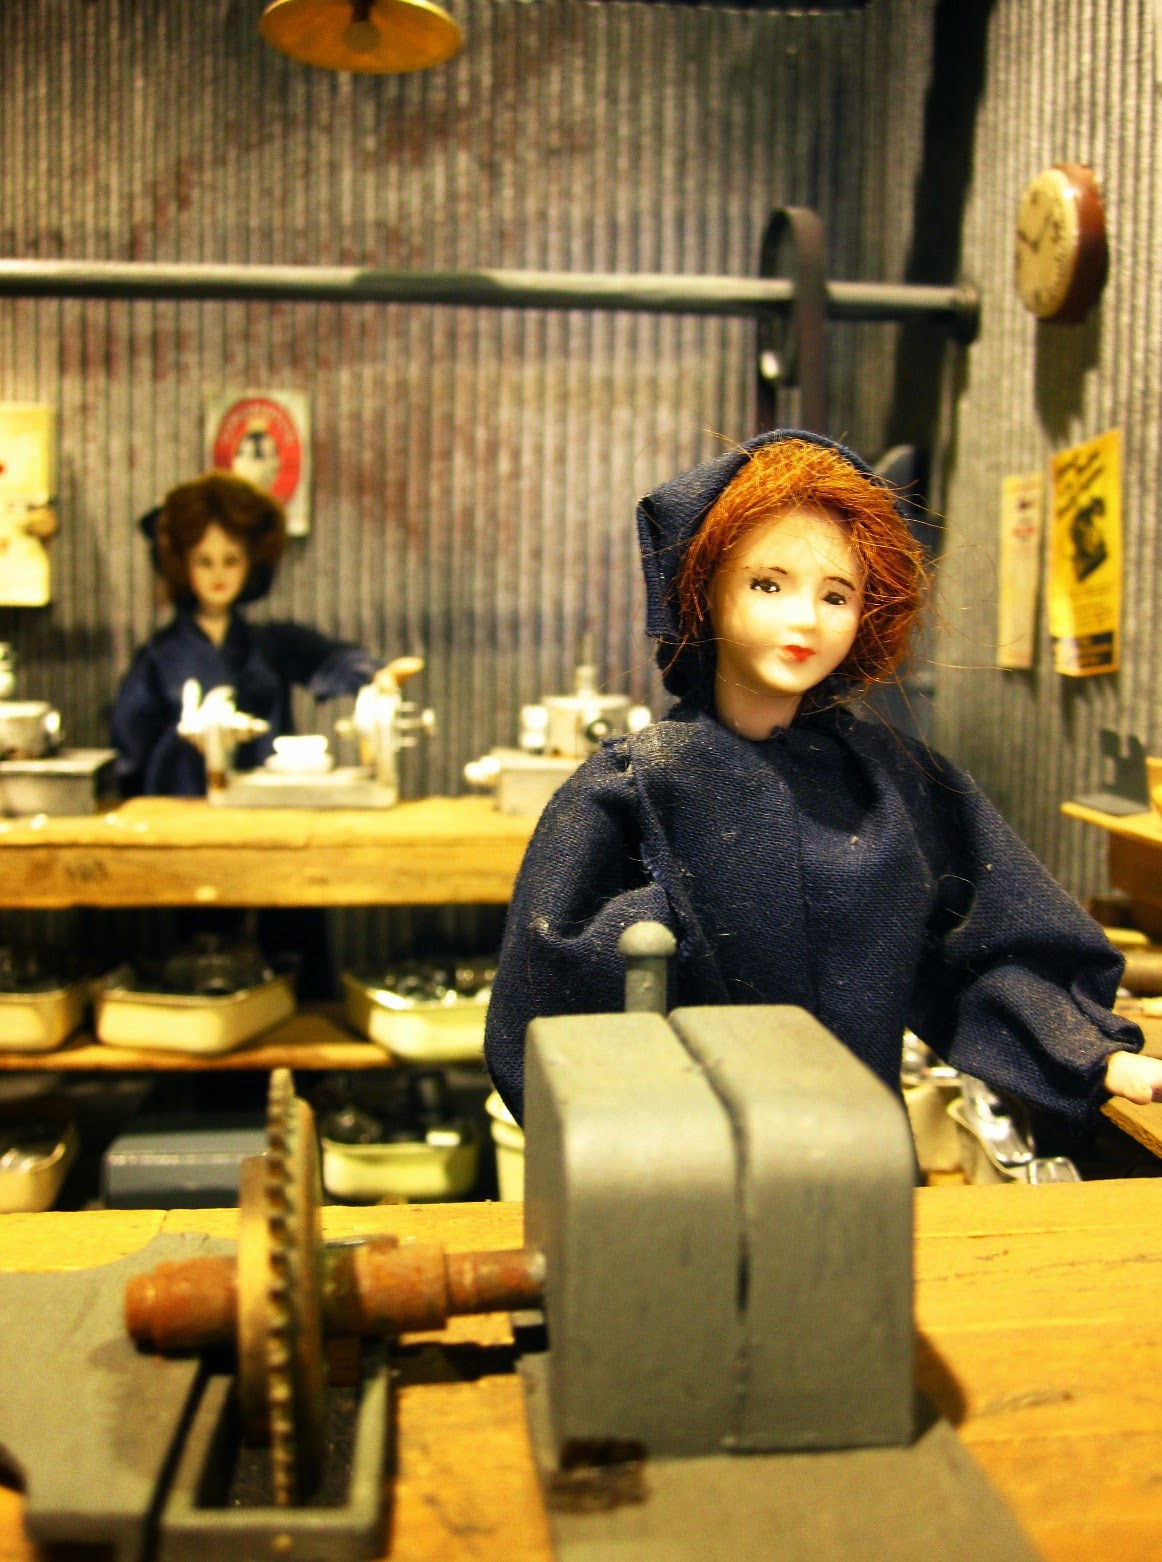 Dolls house miniature of a wartime munitions factory with two dolls at machines.